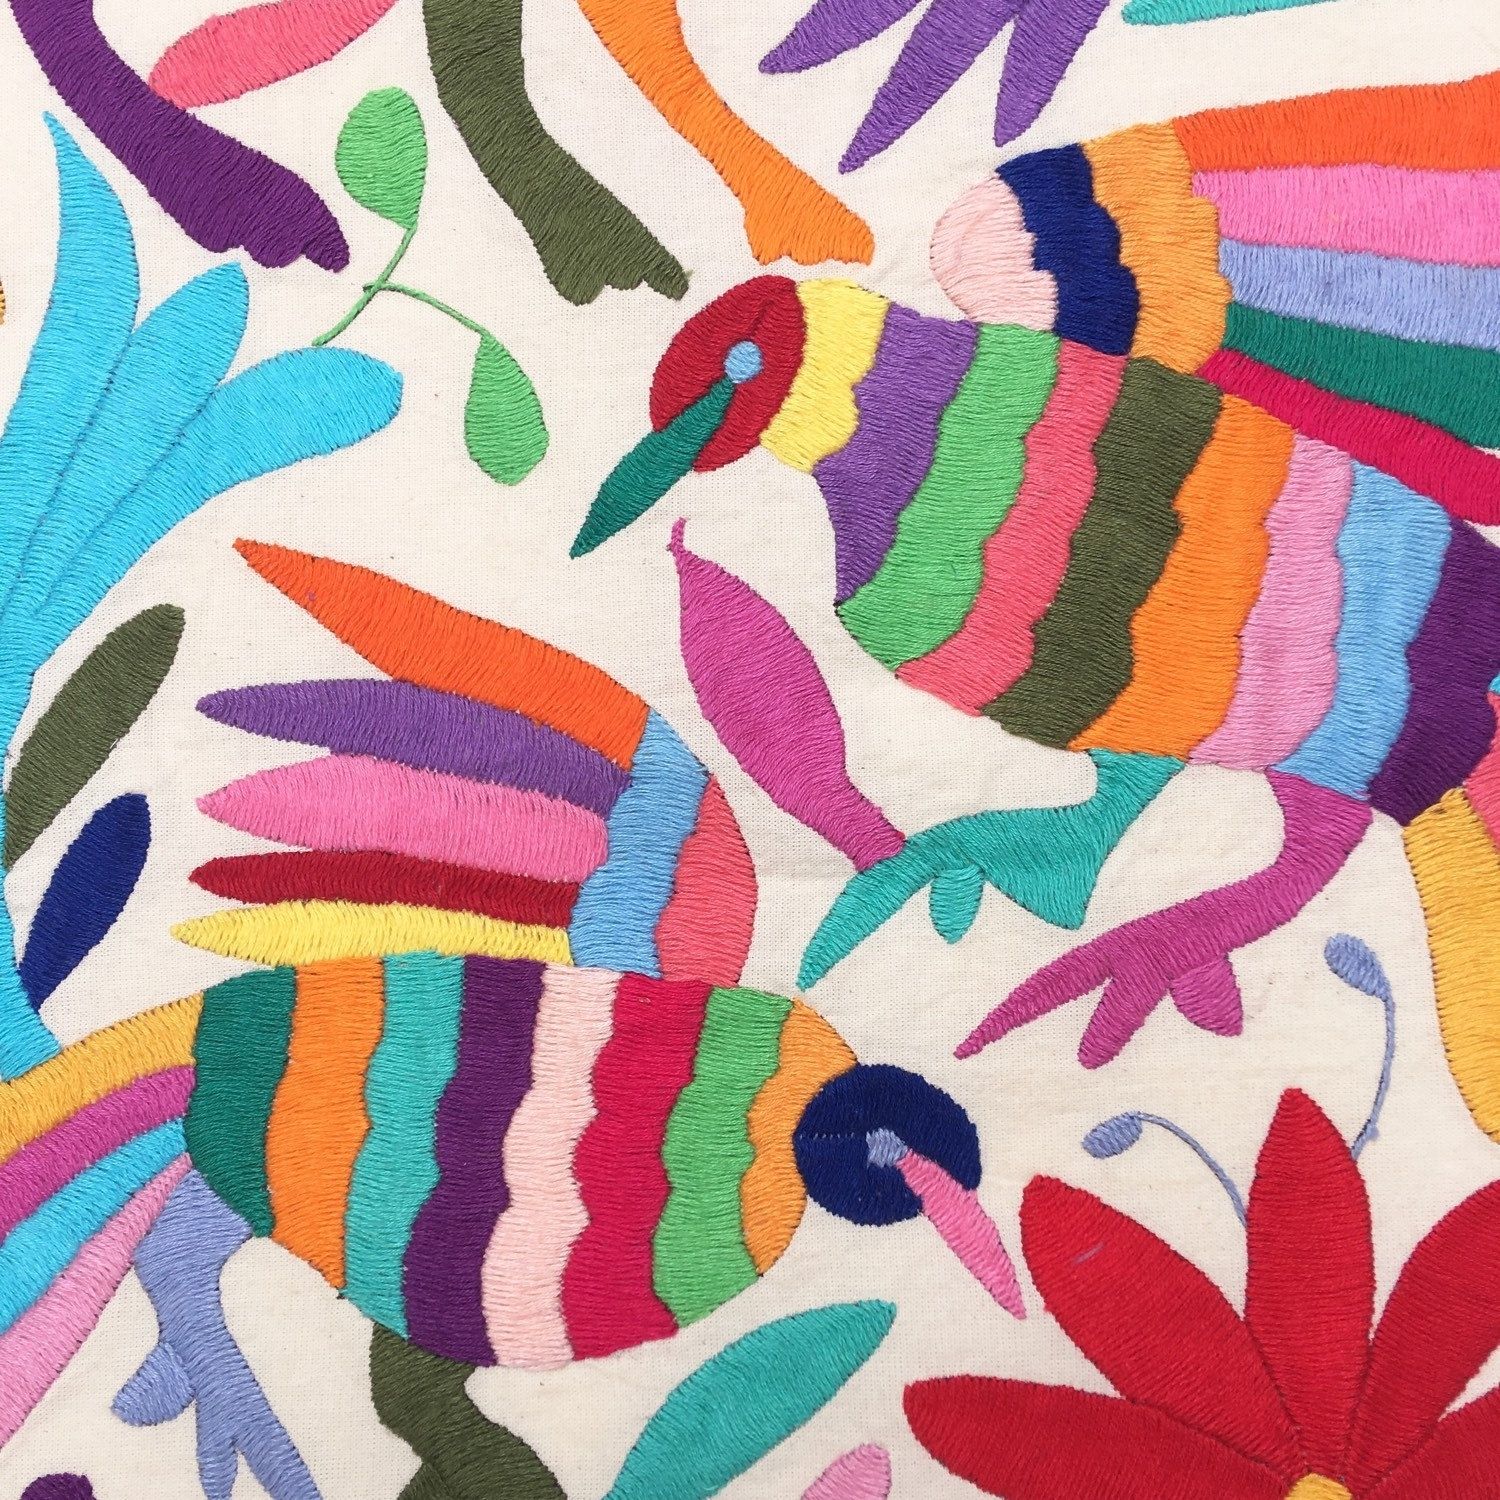 Otomi Fabric Runner Or Wall Art Mexican Tenango Otomi Throughout Most Recently Released Mexican Fabric Wall Art (View 15 of 15)